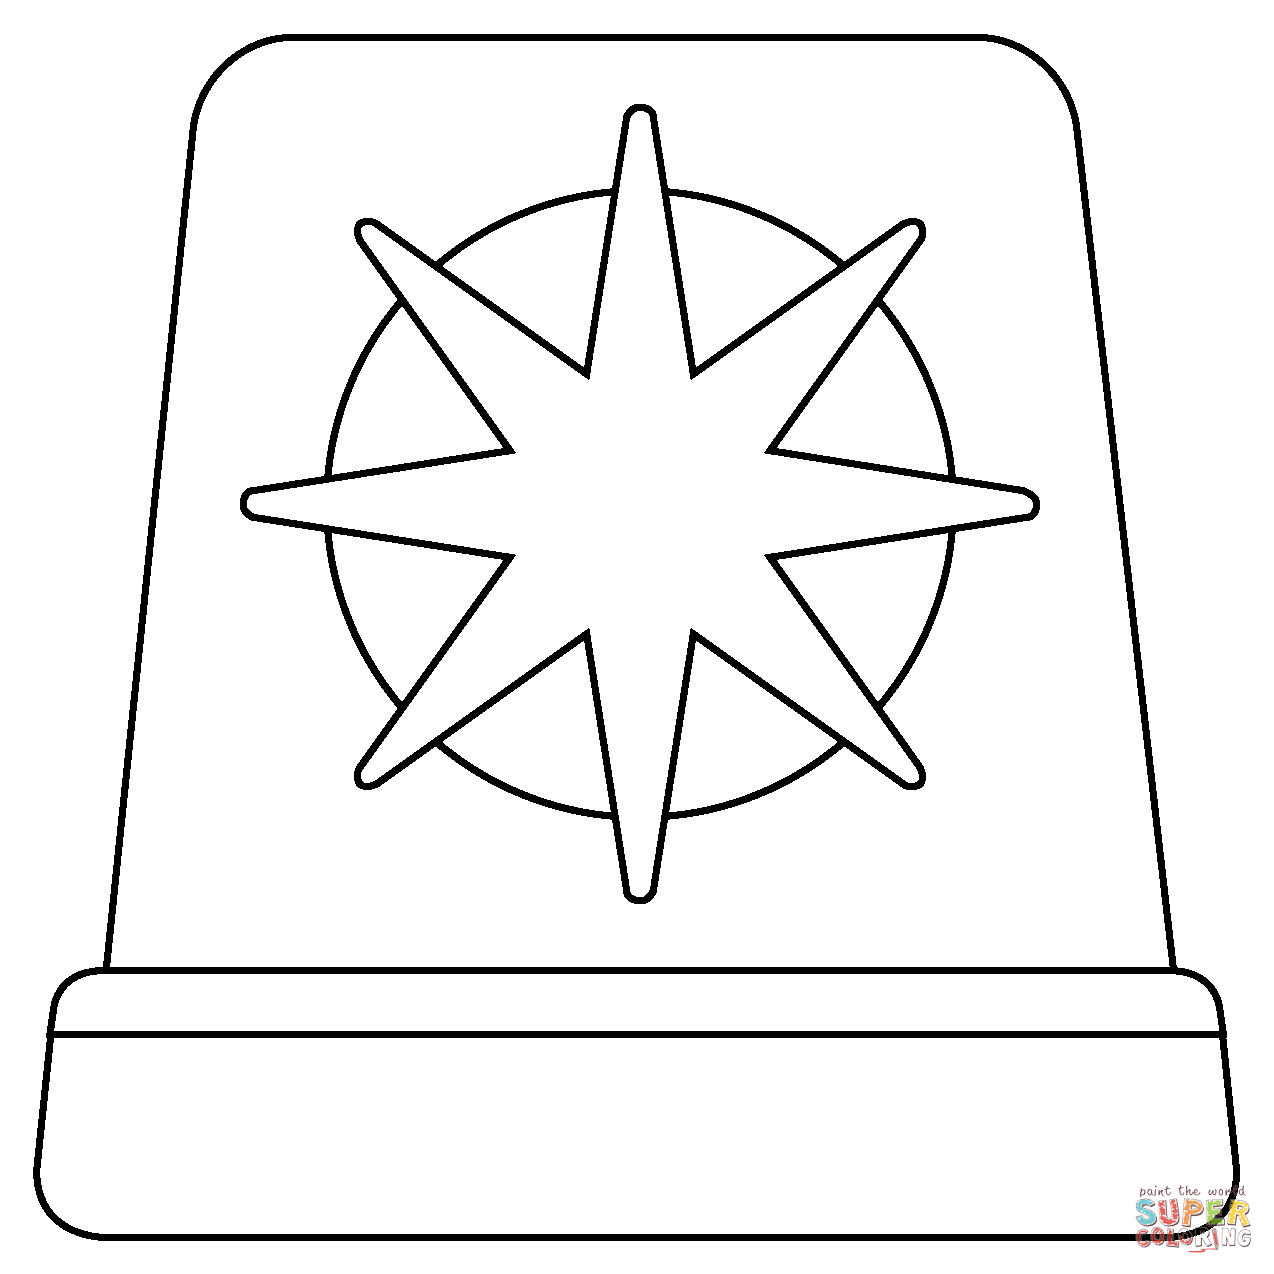 Police car light emoji coloring page free printable coloring pages